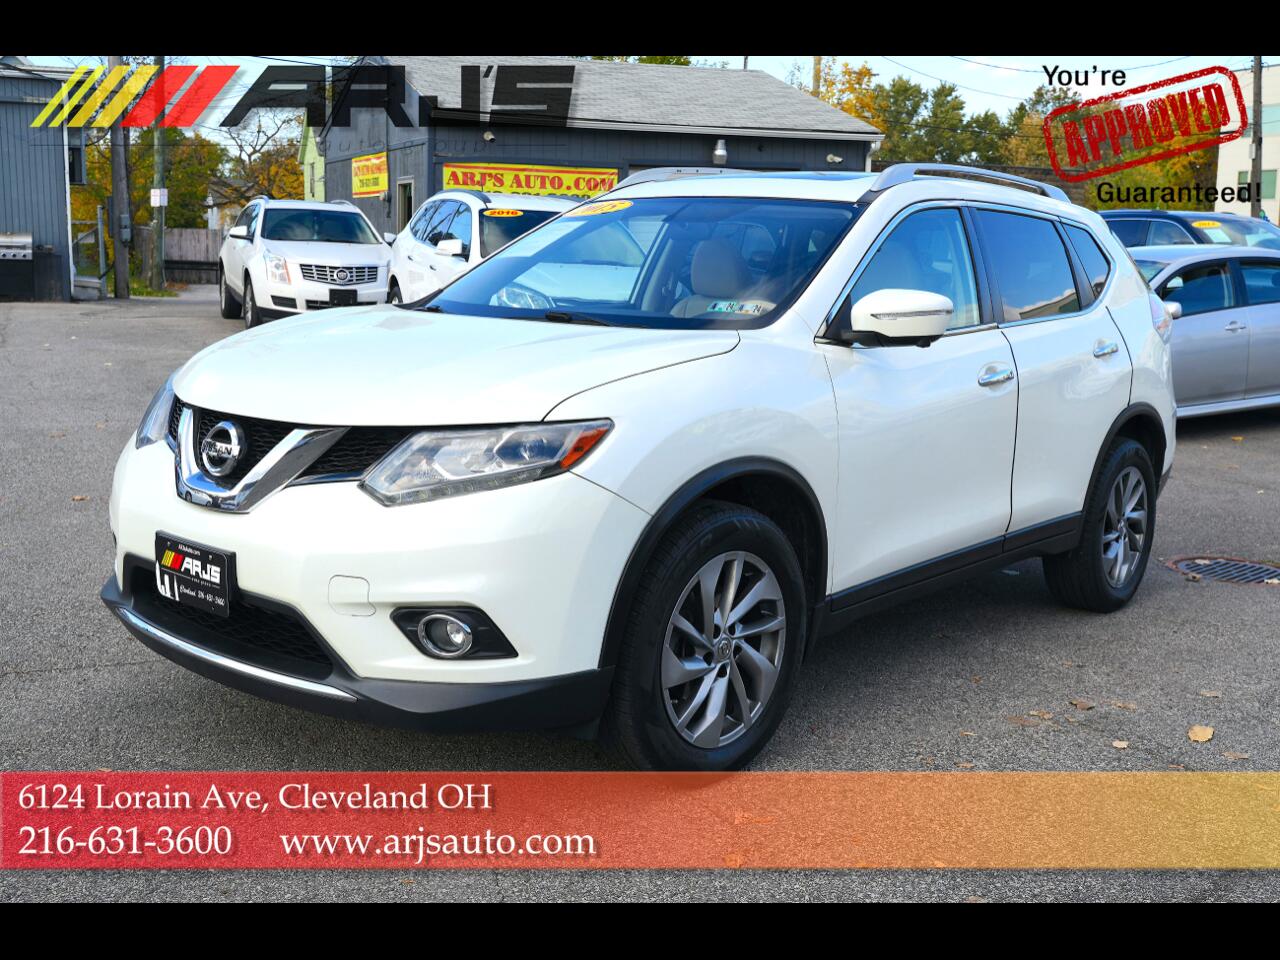 2015 Nissan Rogue Cleveland OH